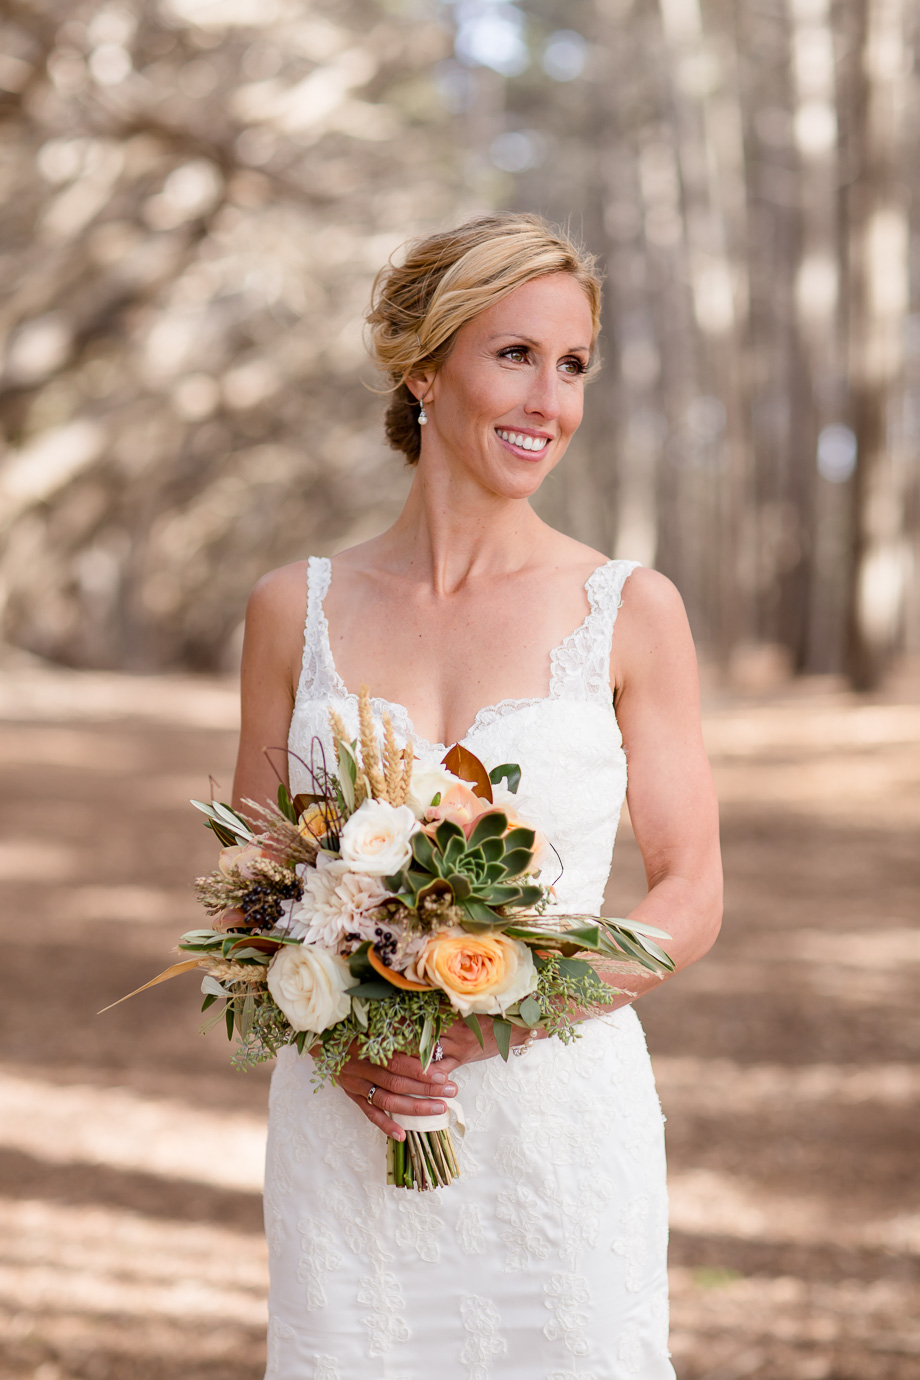 gorgeous bride with an elegant lace wedding gown and a succulent bouquet in a magical forest - Half Moon Bay wedding photographer